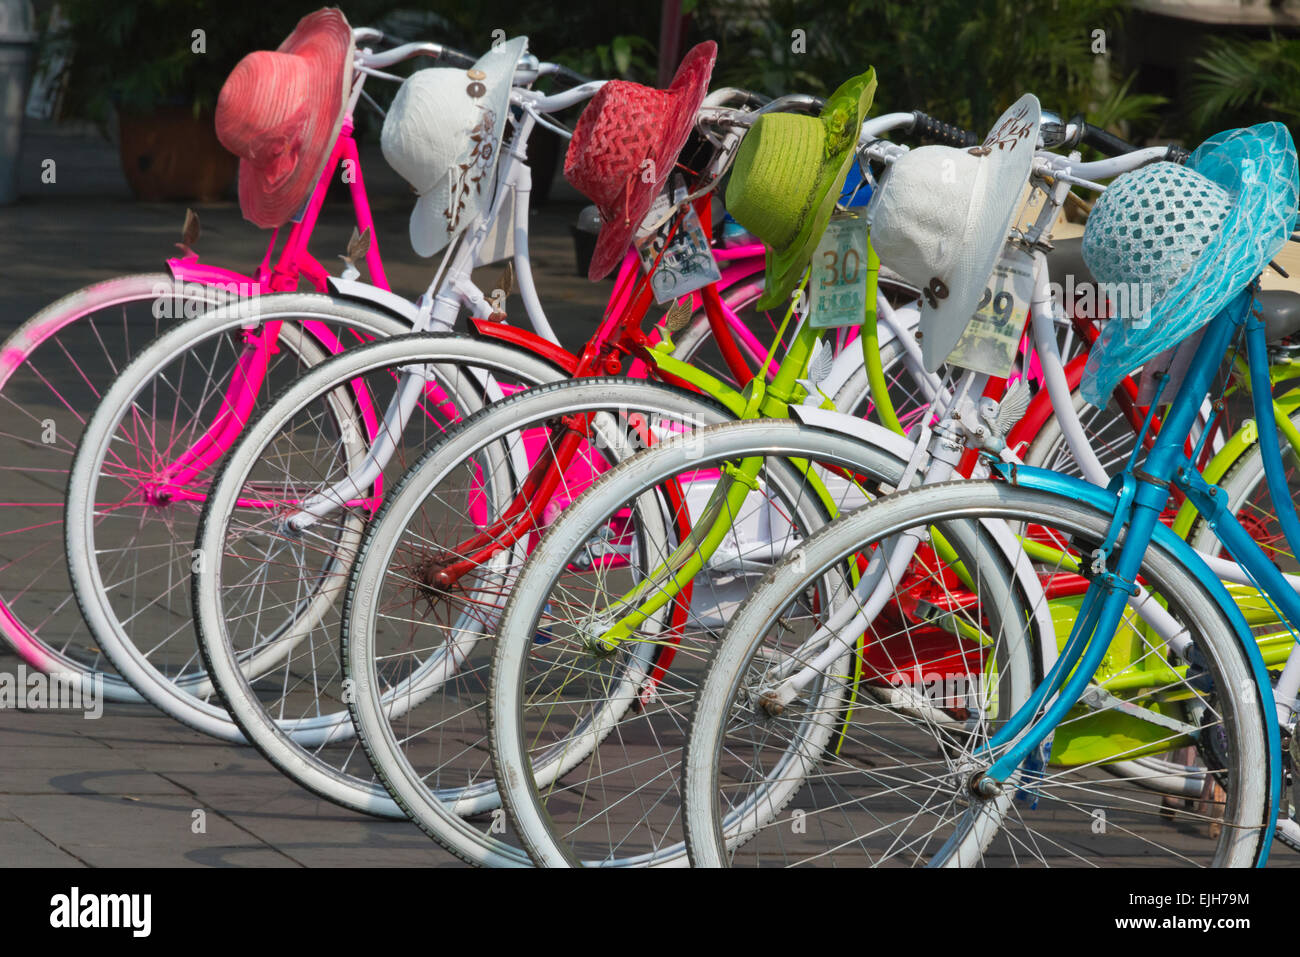 Bicycles and colorful straw hats on the street, Jakarta, Indonesia Stock Photo